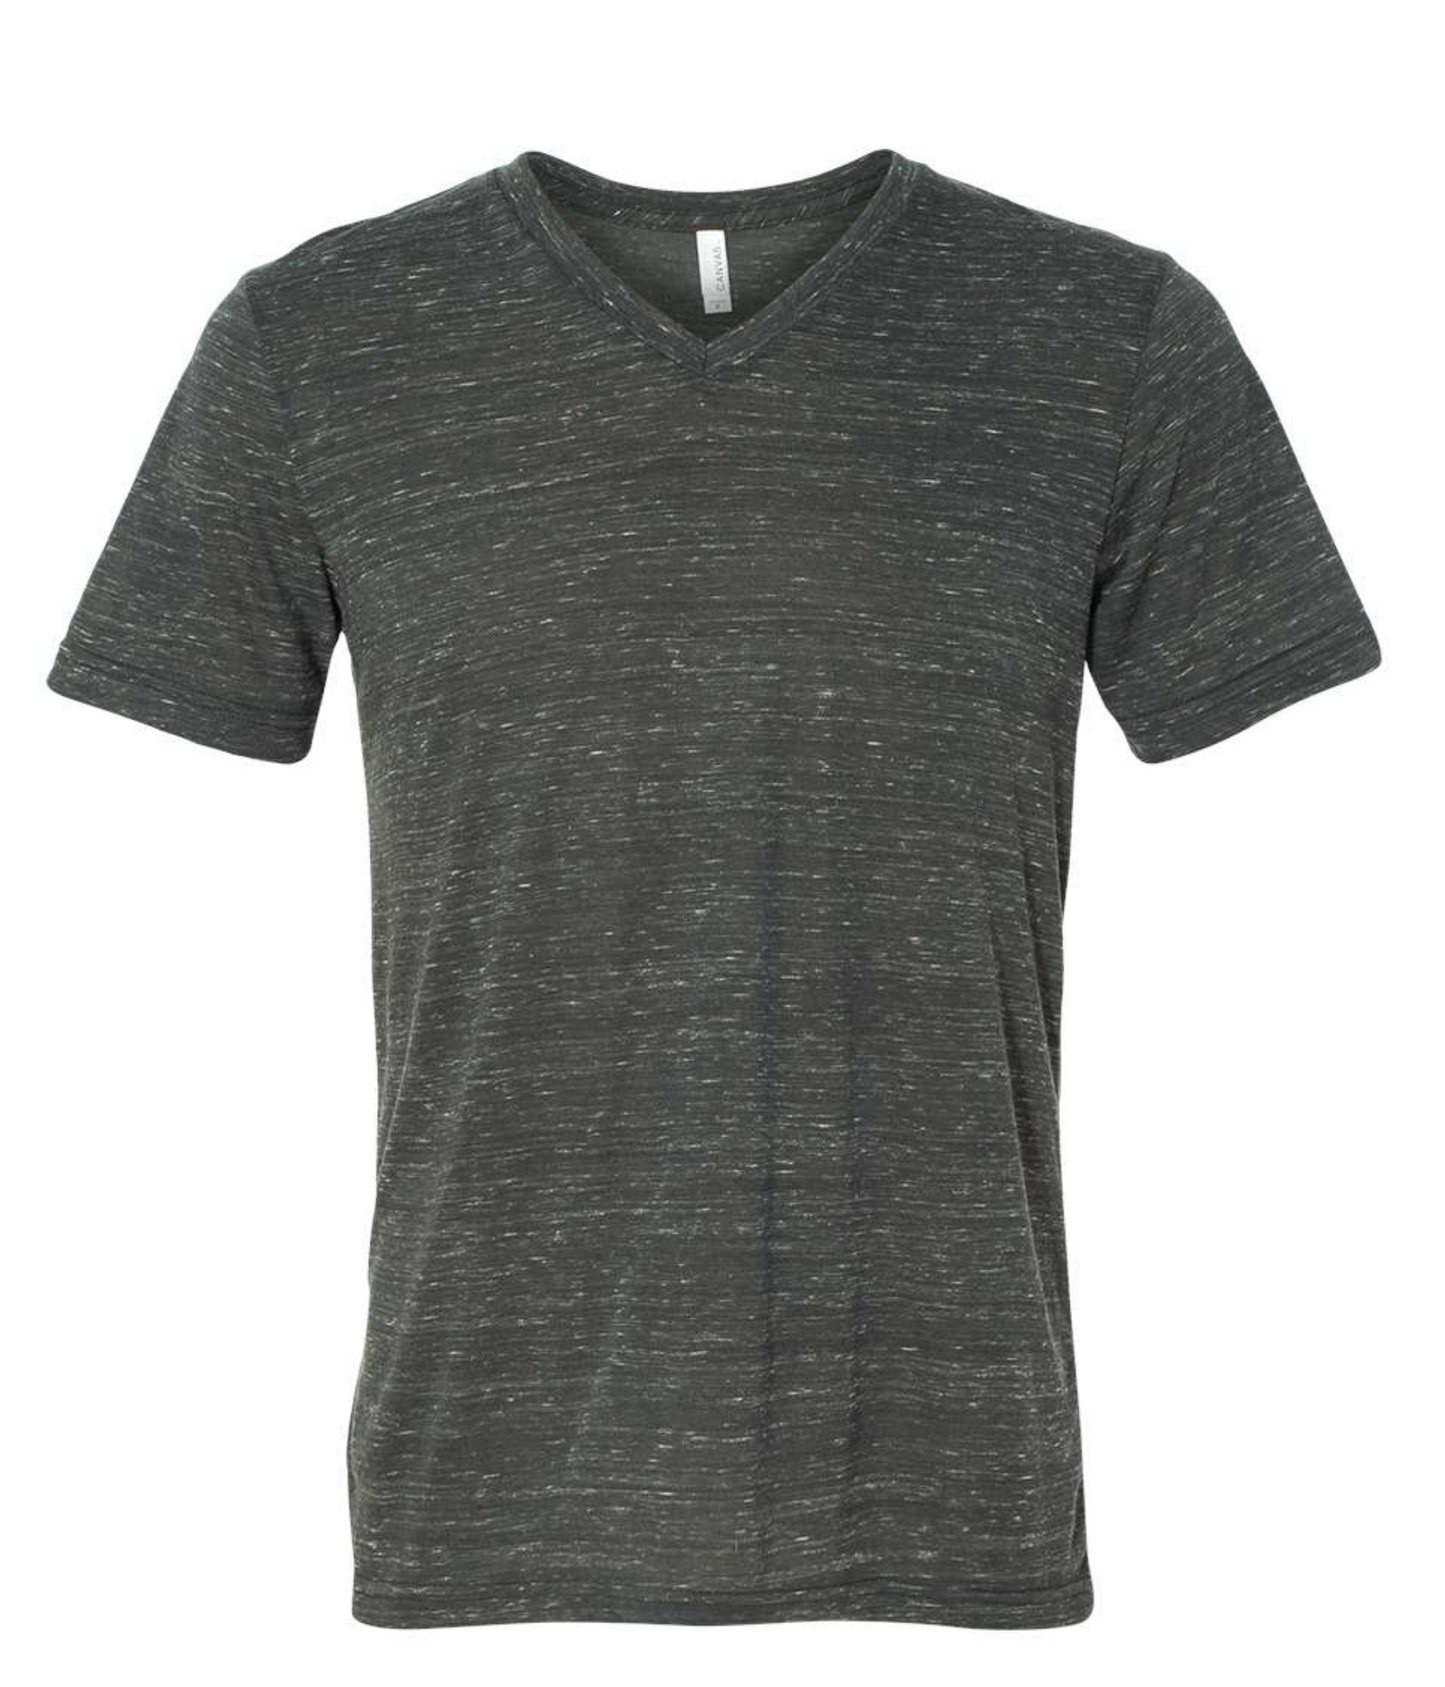 Charcoal Marble V-Neck Bella Canvas blank unisex tee